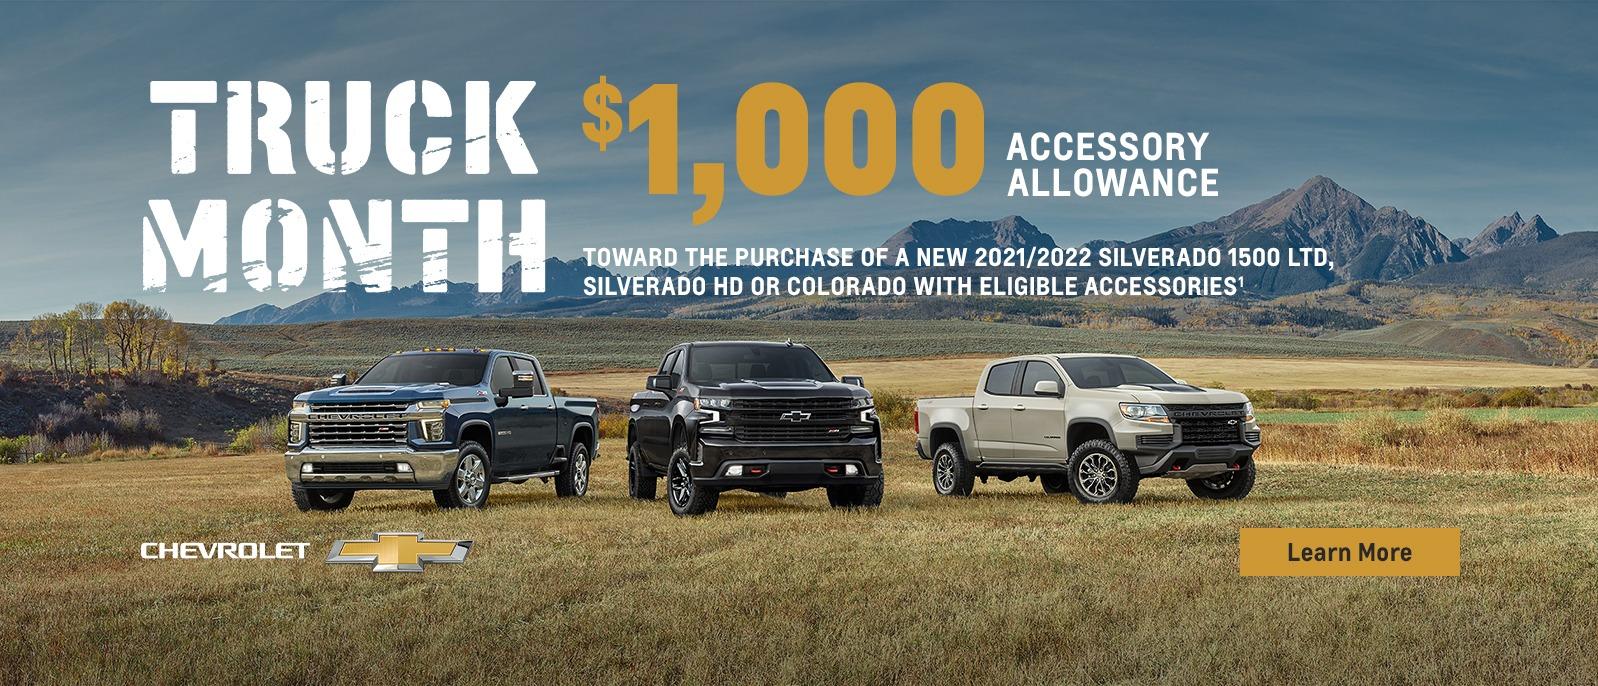 Truck Month. Make it your own. $1,000 accessory allowance toward the purchase of a new 2021/2022 Silverado 1500 LTD, Silverado HD or Colorado with Eligible accessories.